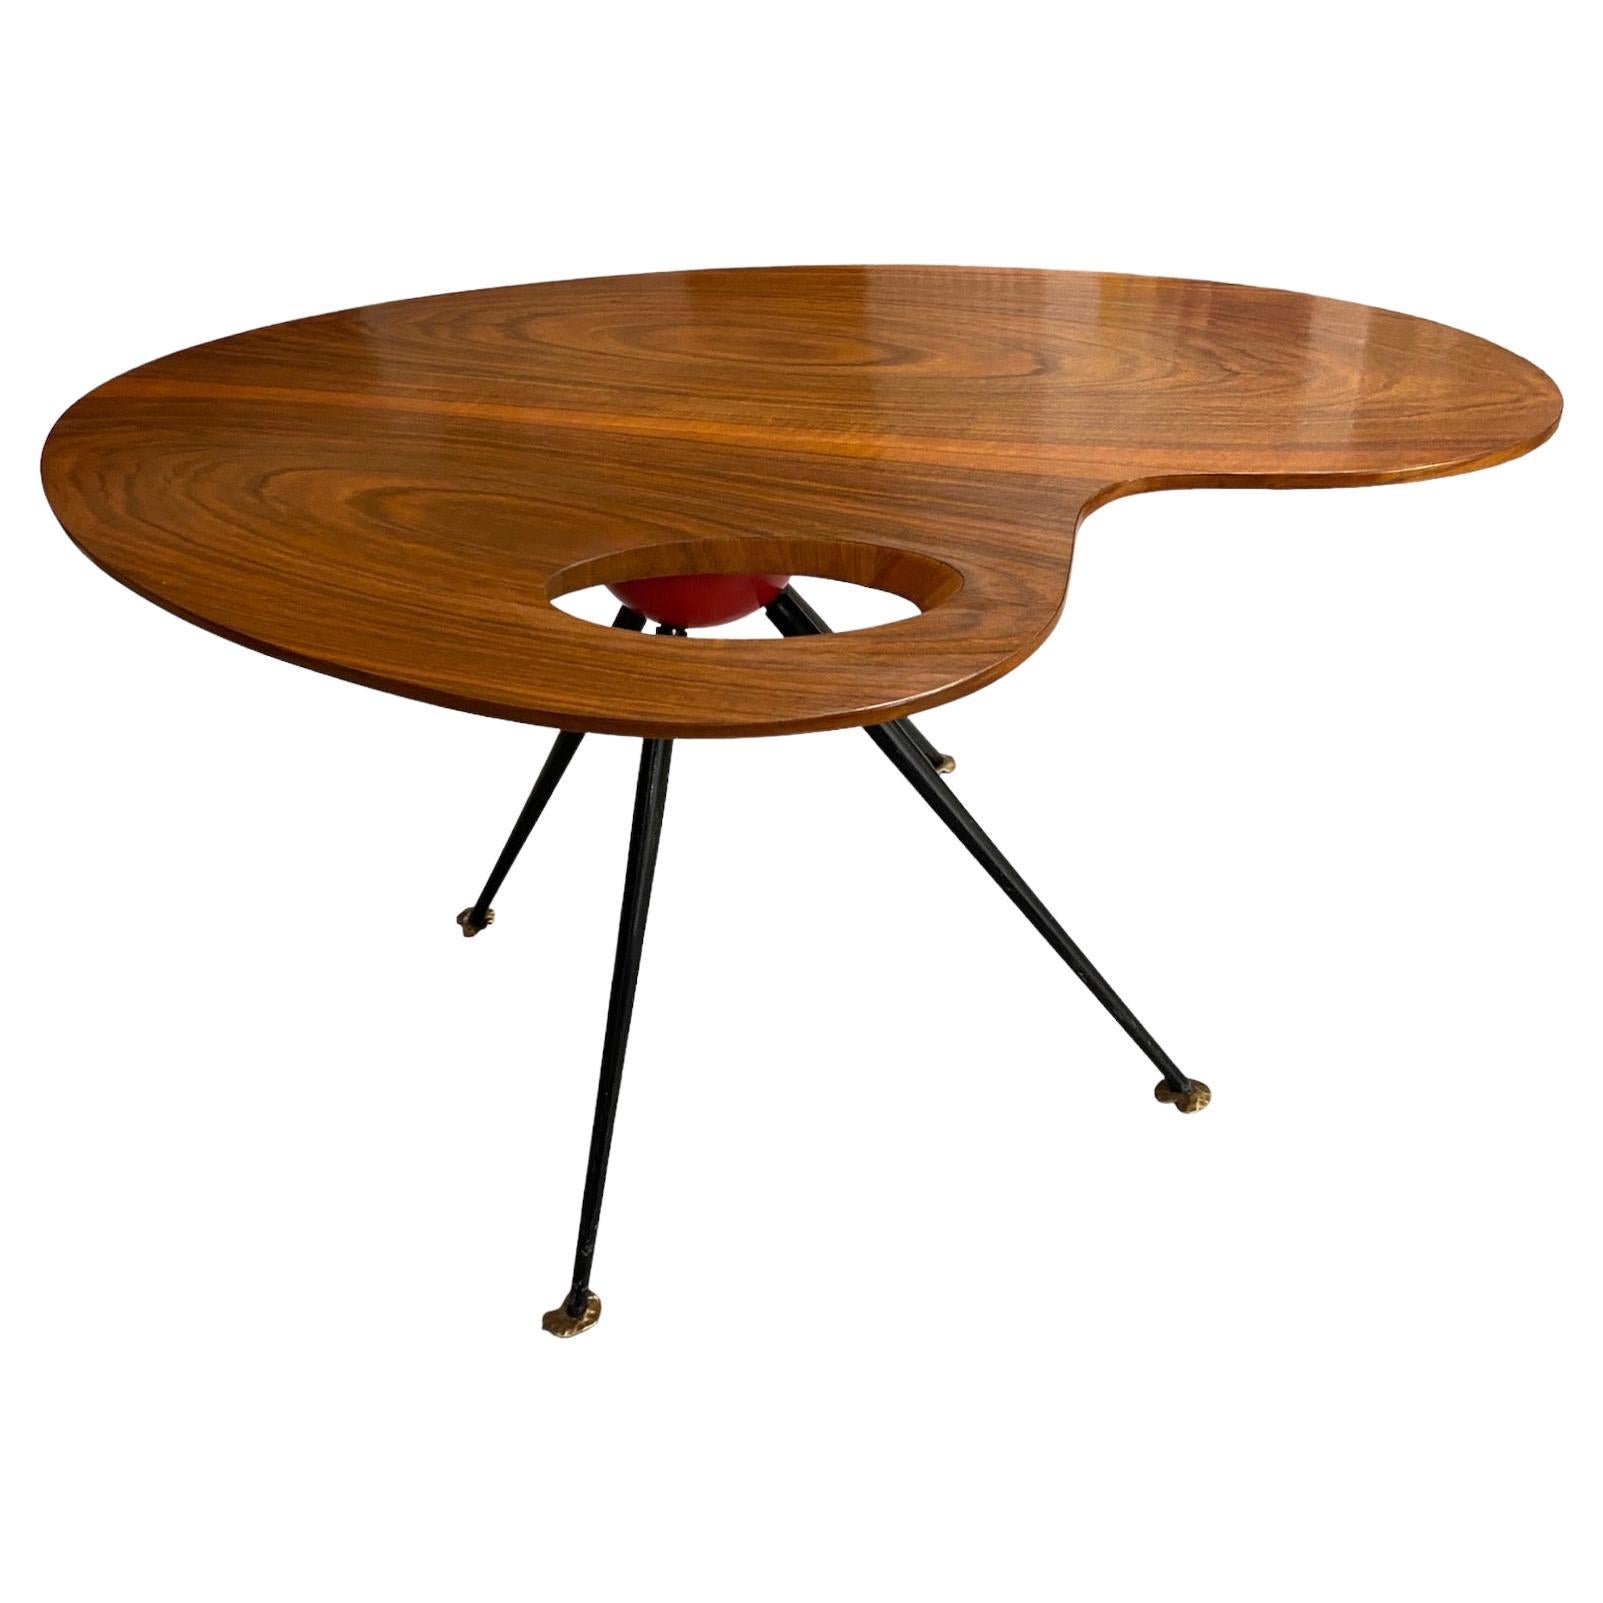 Midcentury Organic Shaped Coffee Table in the Manner of Gio Ponti, circa 1950s For Sale 6